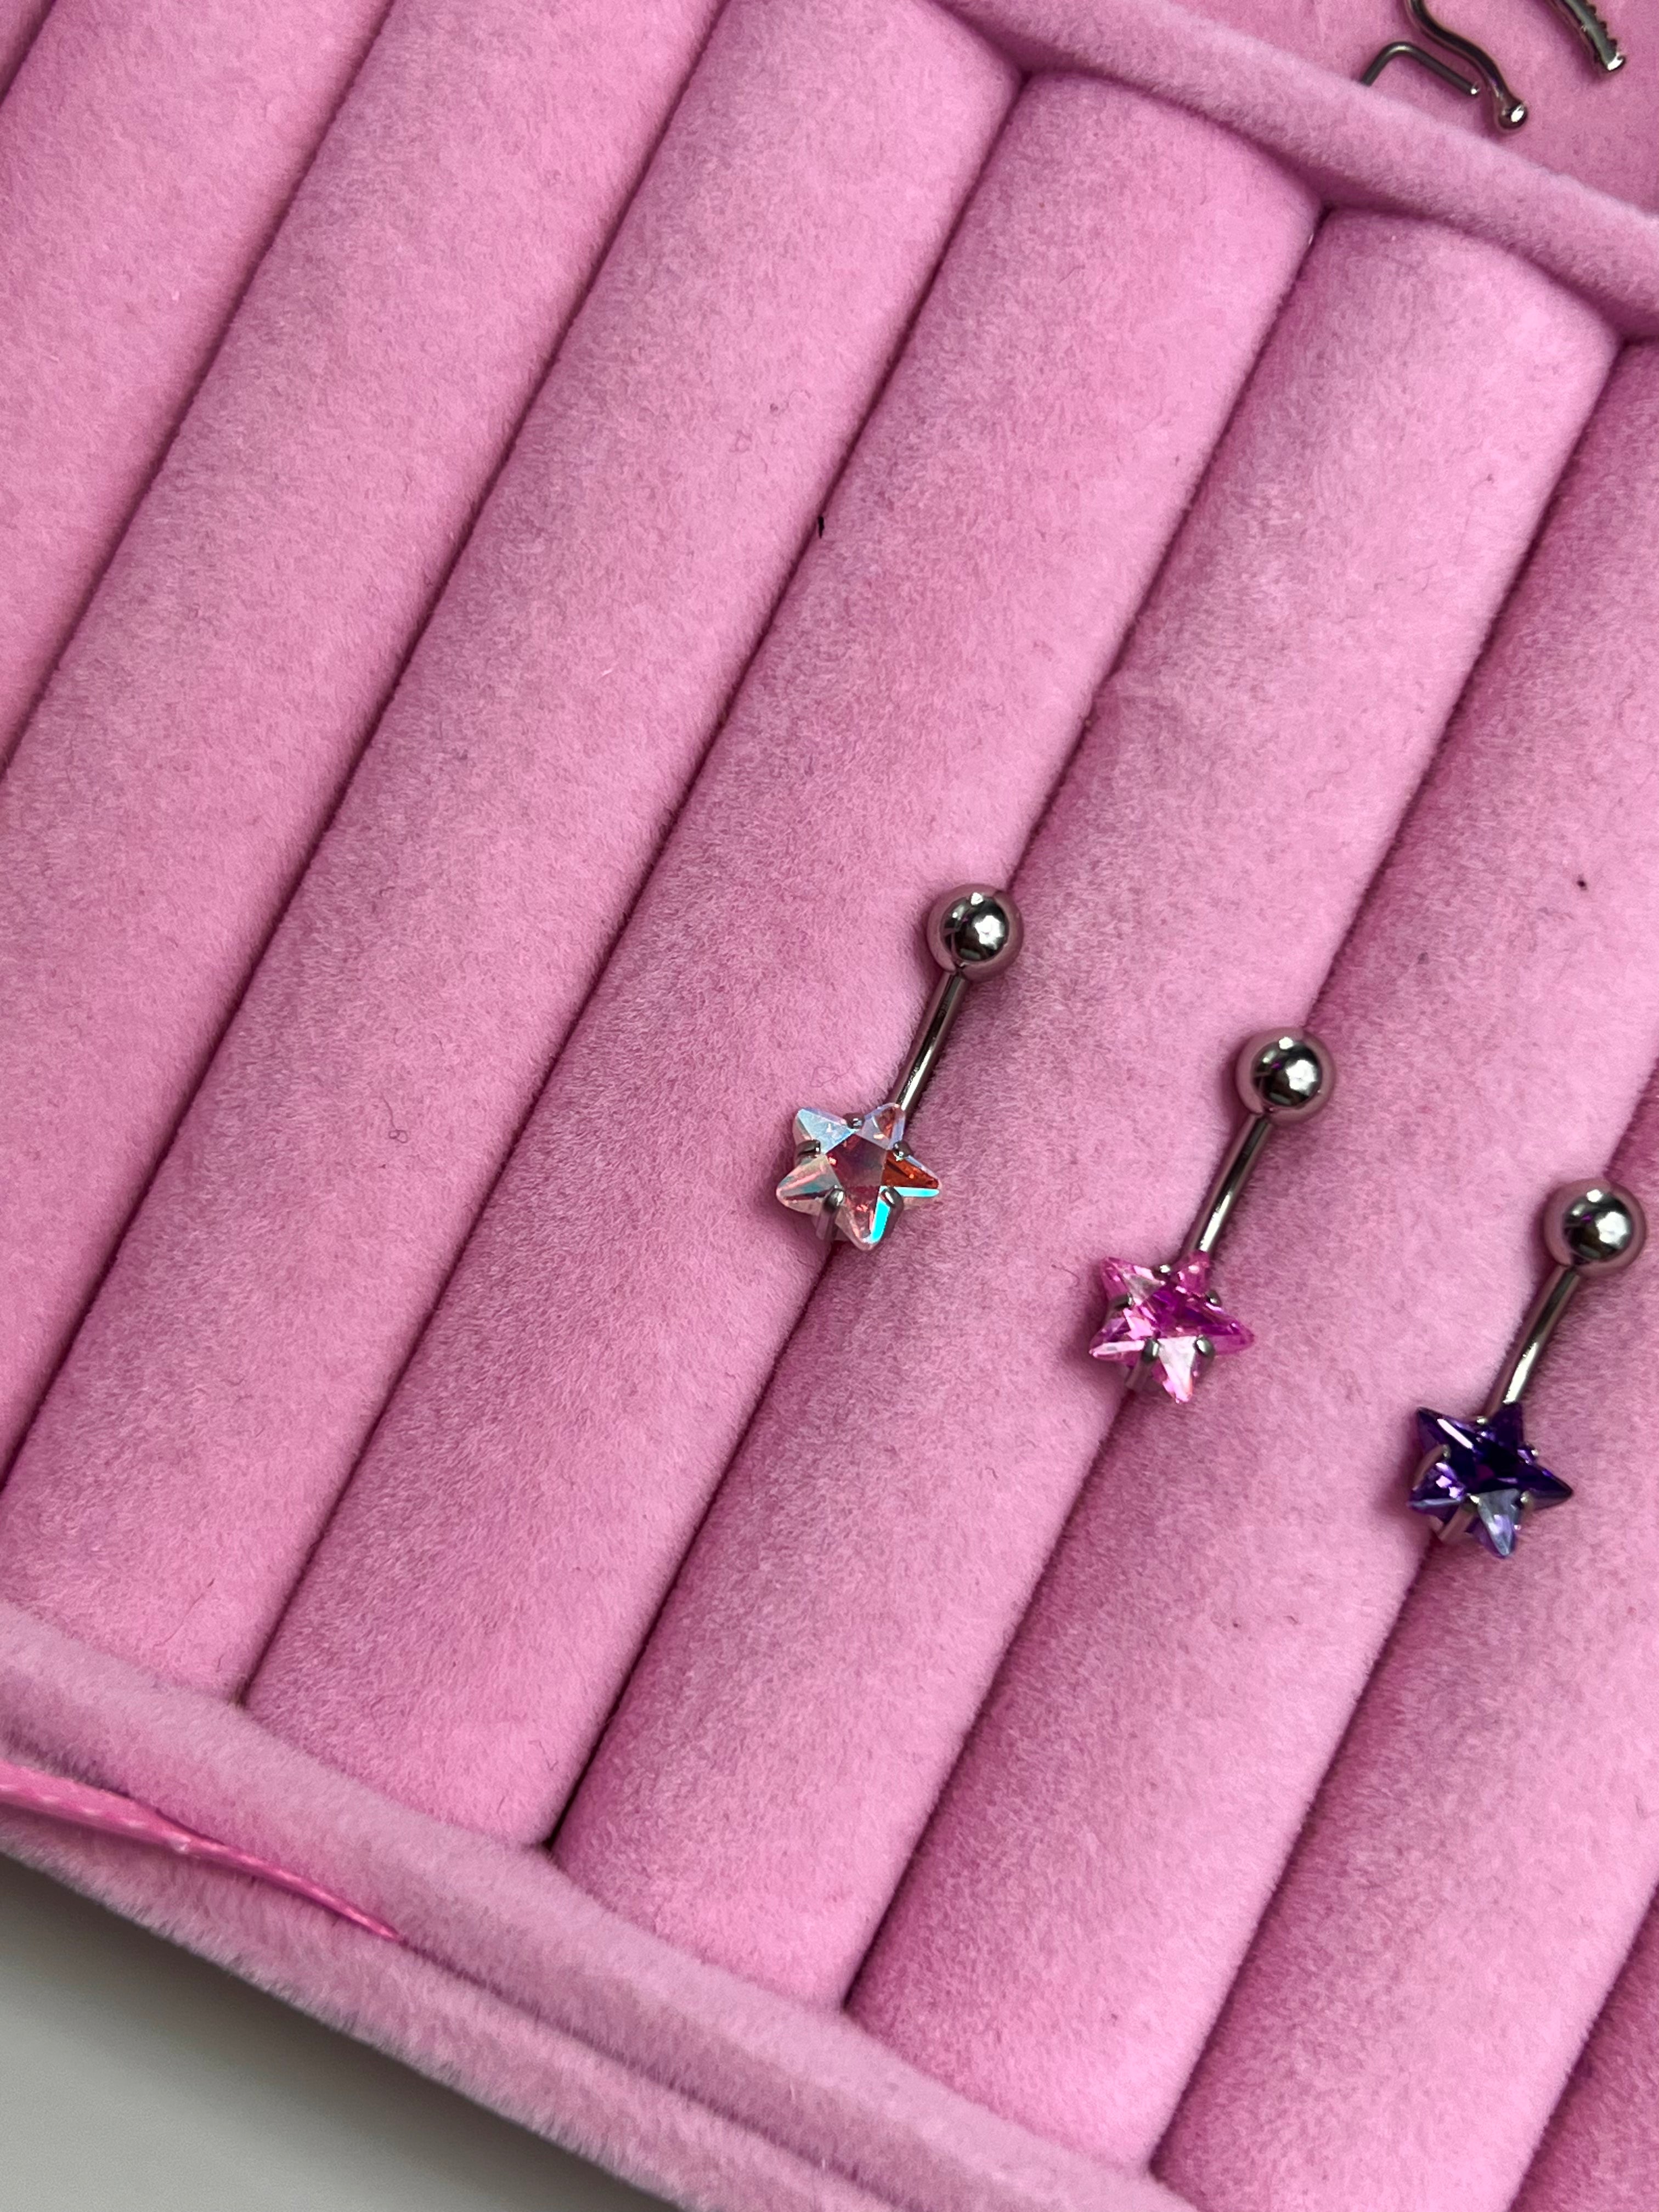 Holo Star Belly Ring